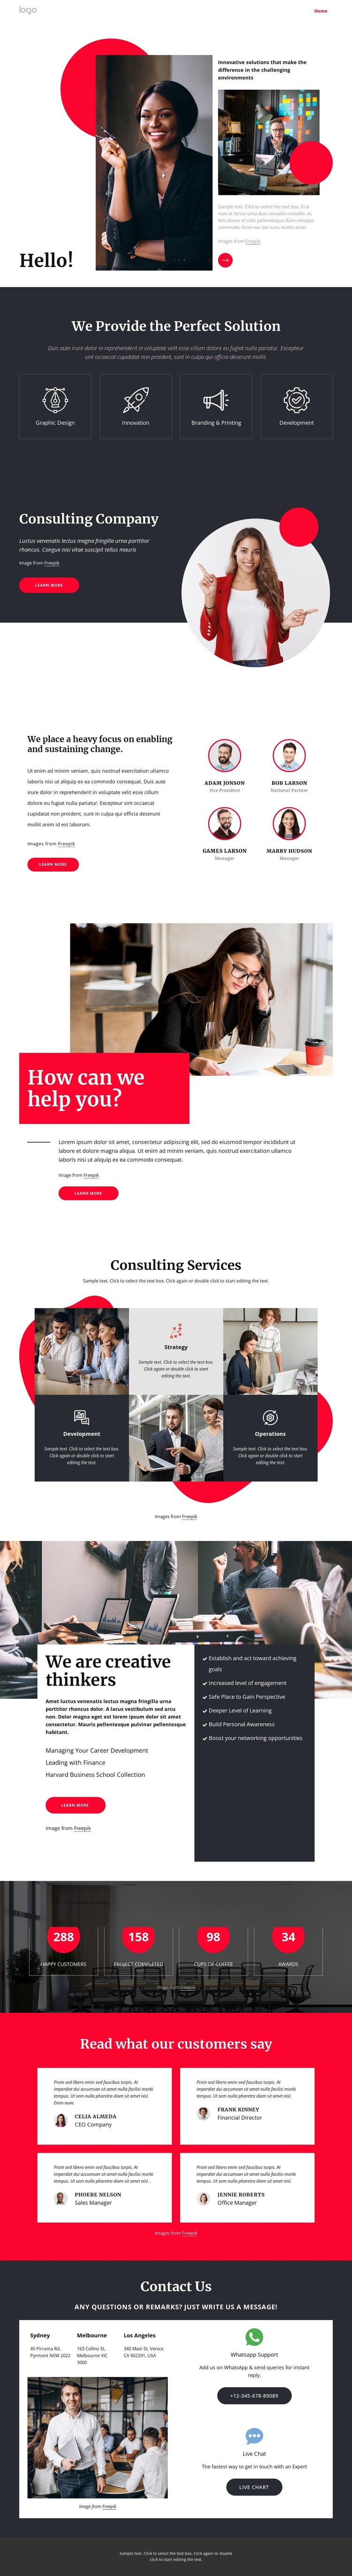 Consulting company NYC Web Design